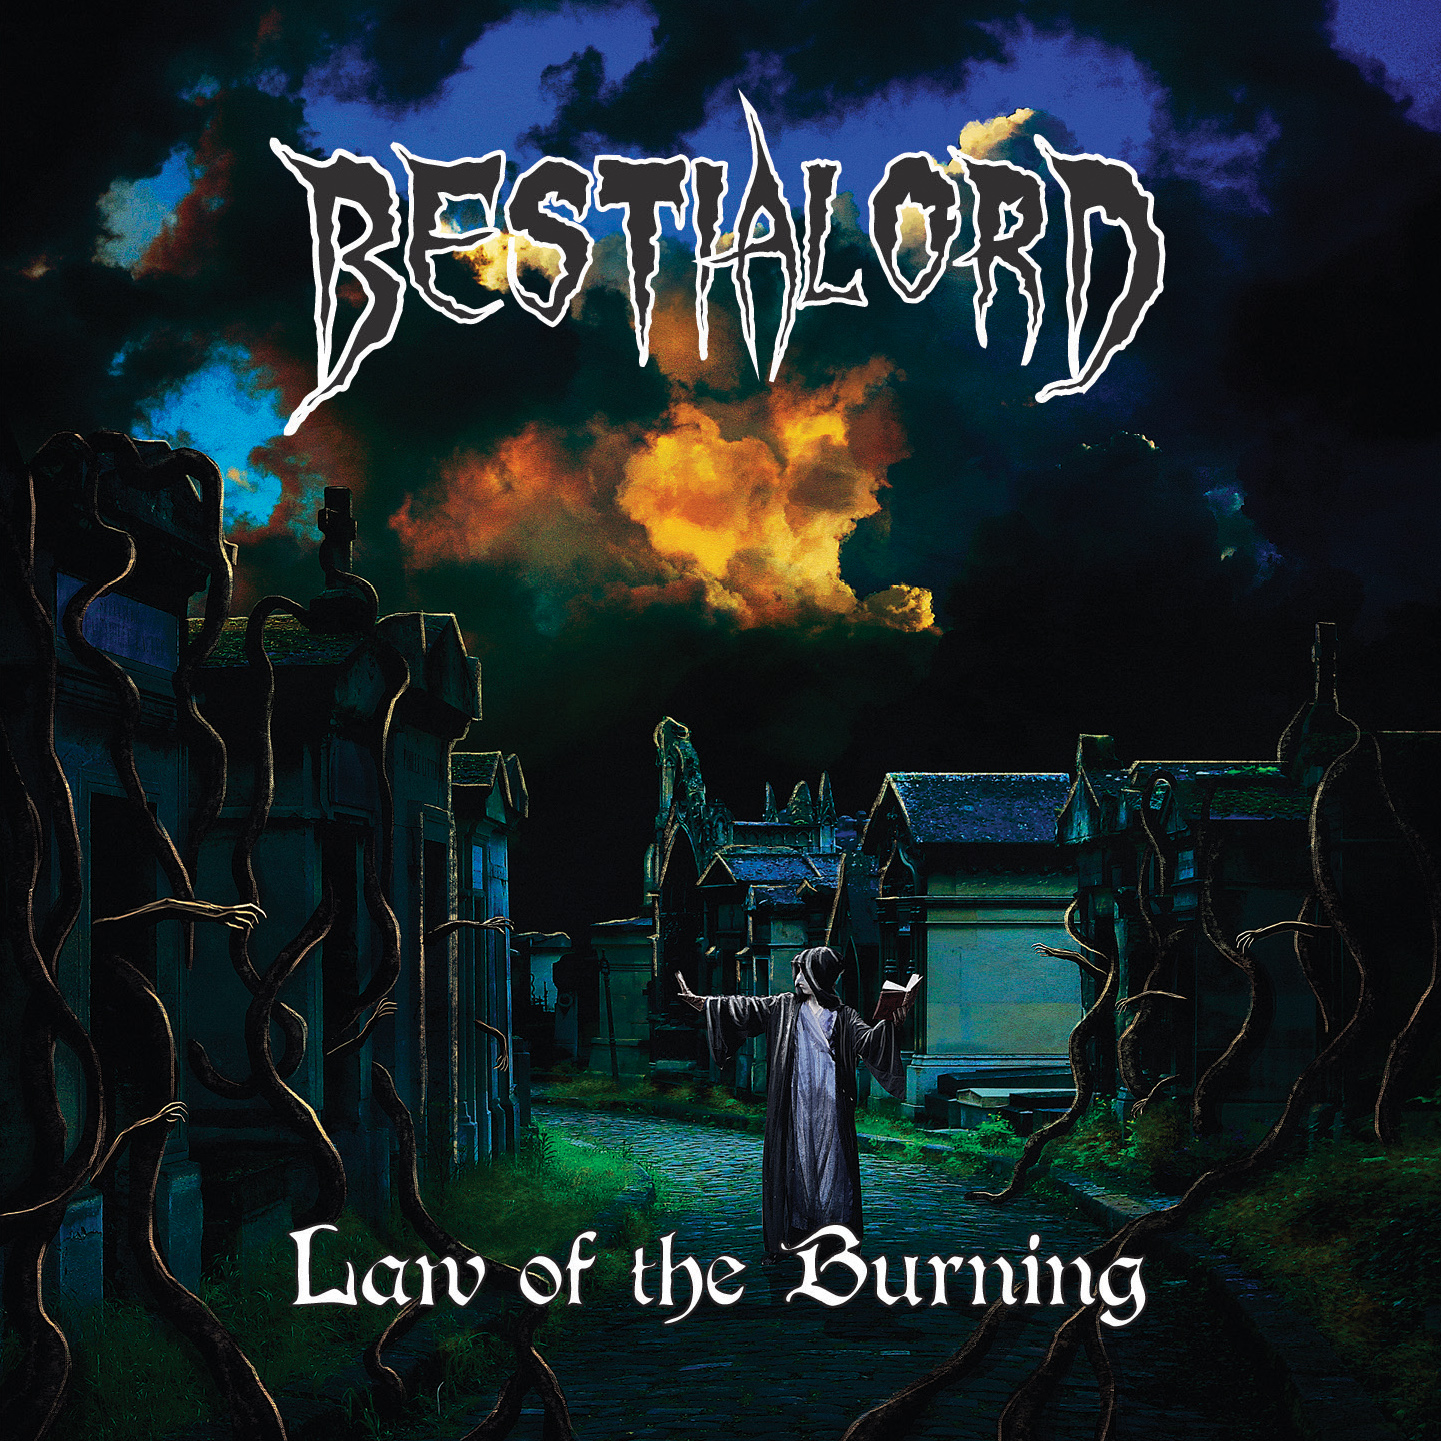 Burning Metal Game - Bestialord Law Of The Burning , HD Wallpaper & Backgrounds